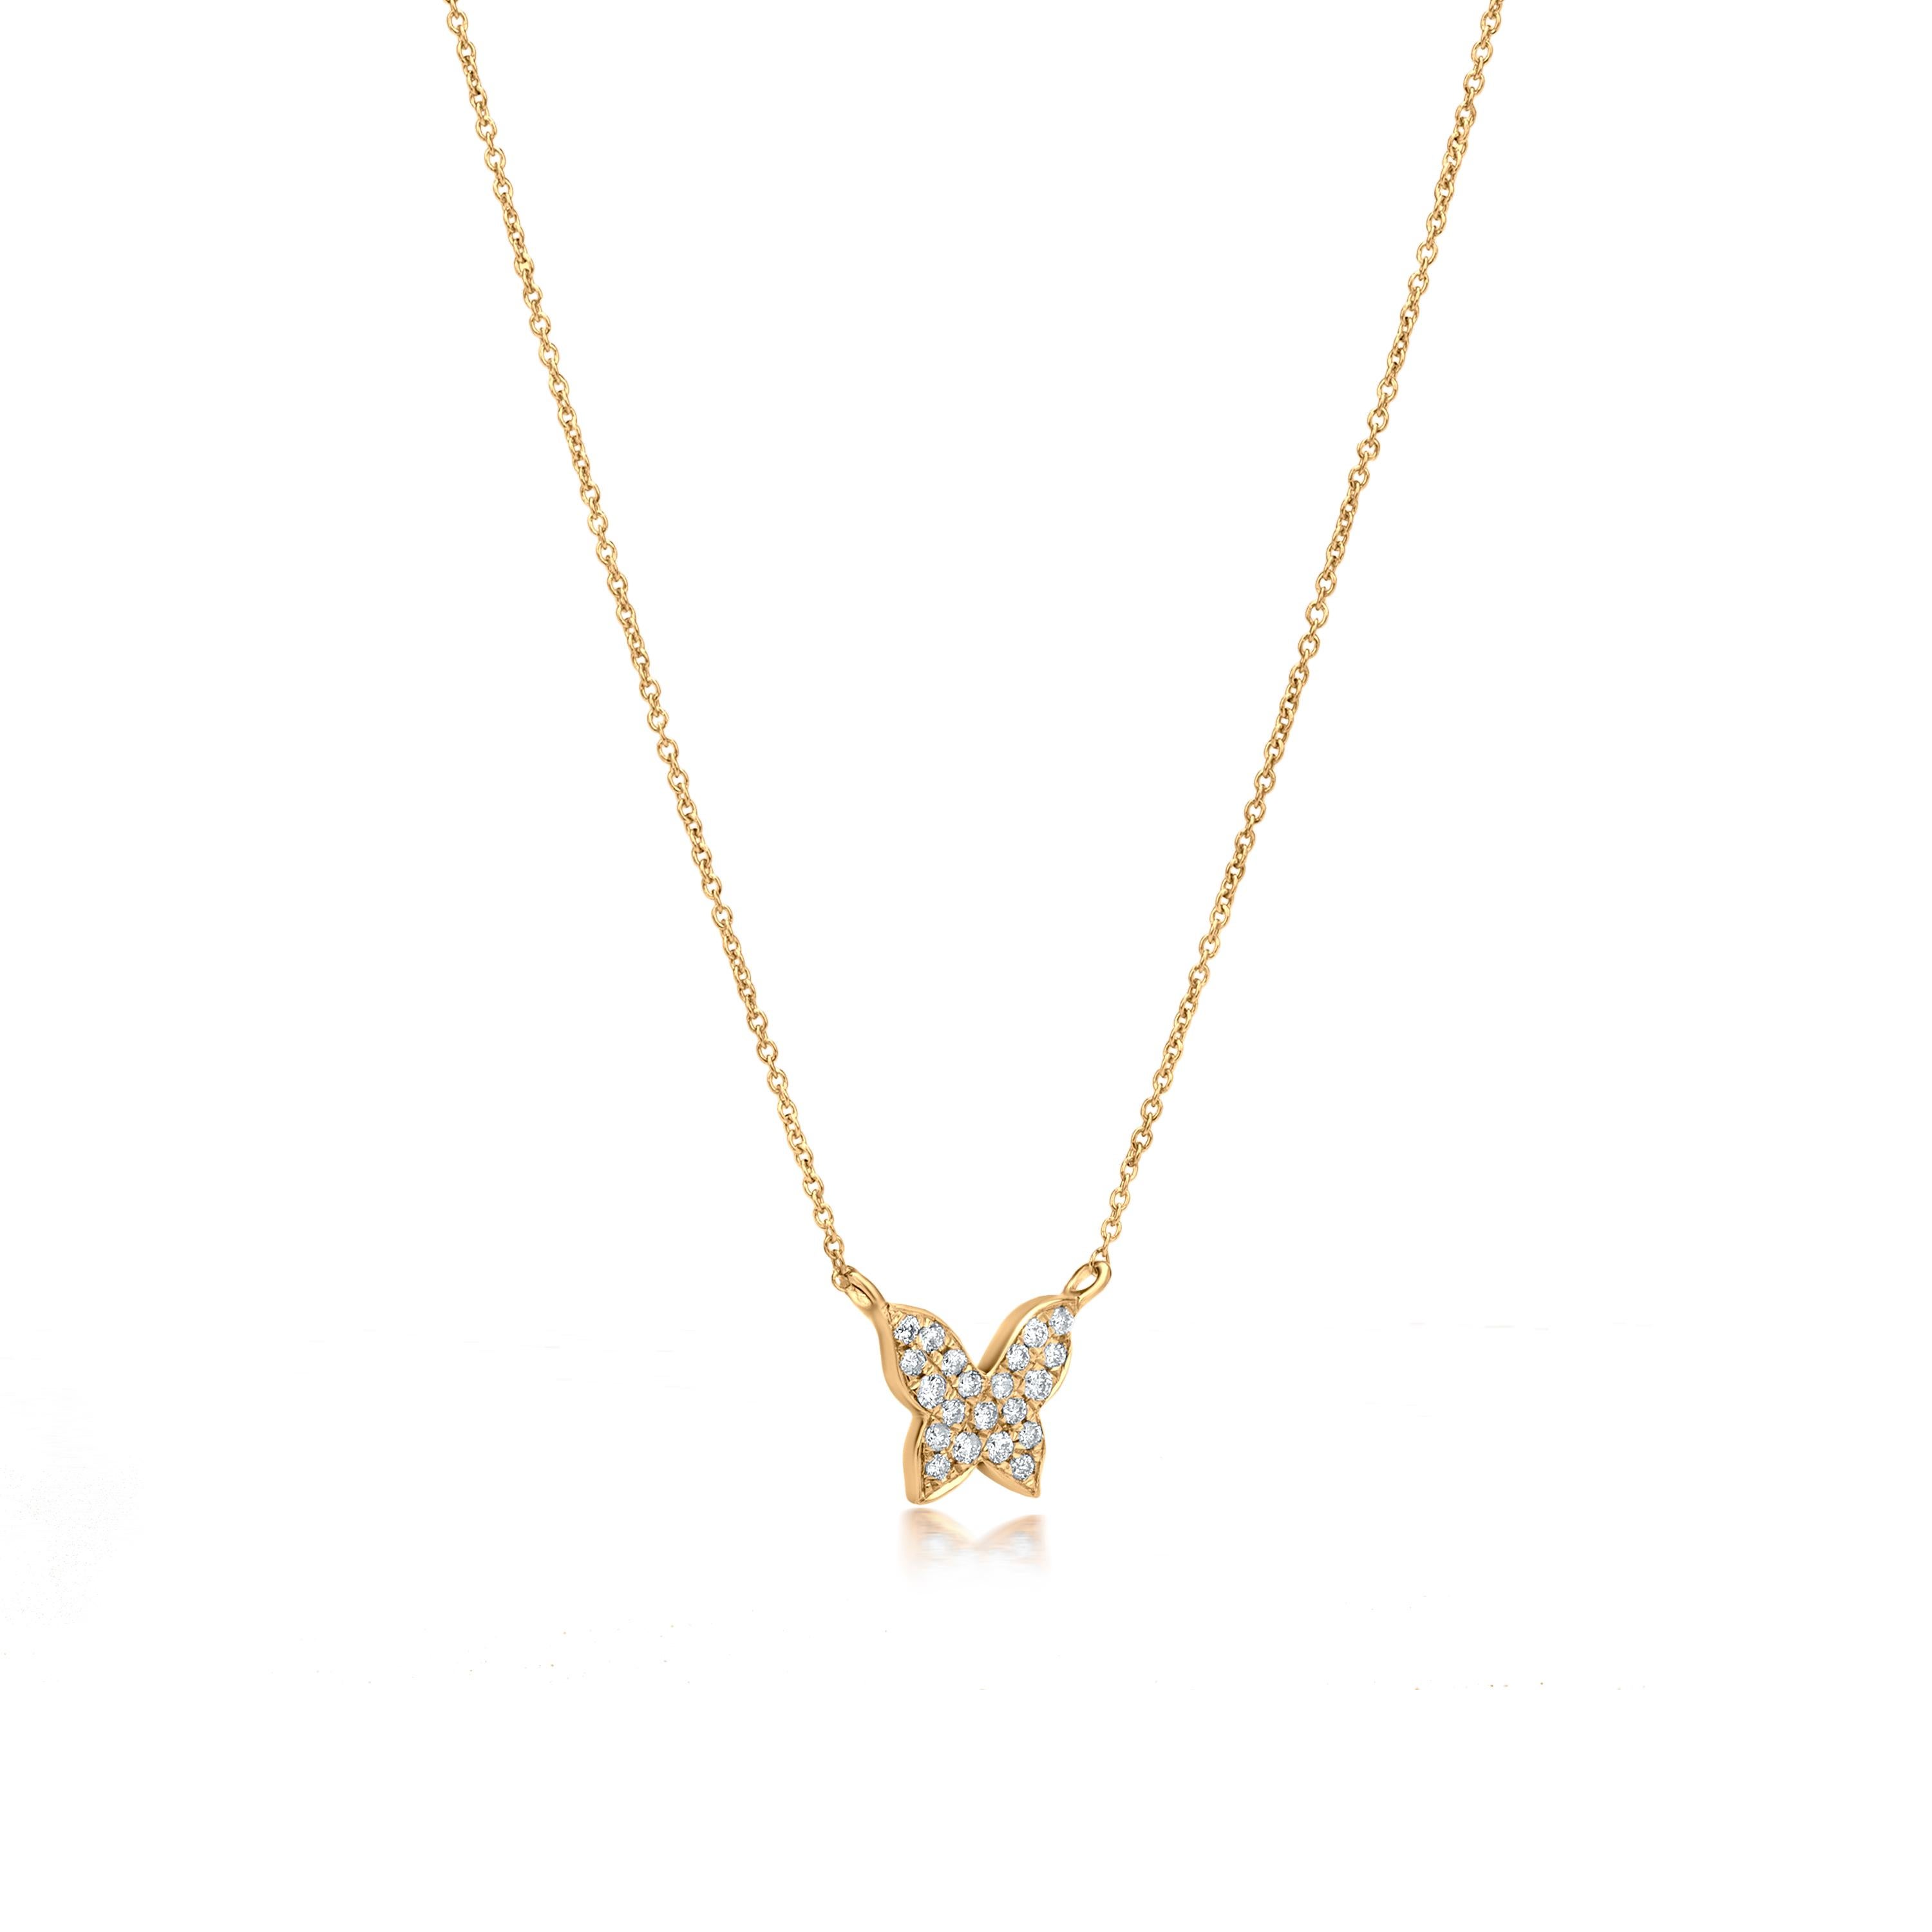 Round Cut Butterfly Diamond Pendant Necklace in 18k Yellow Gold